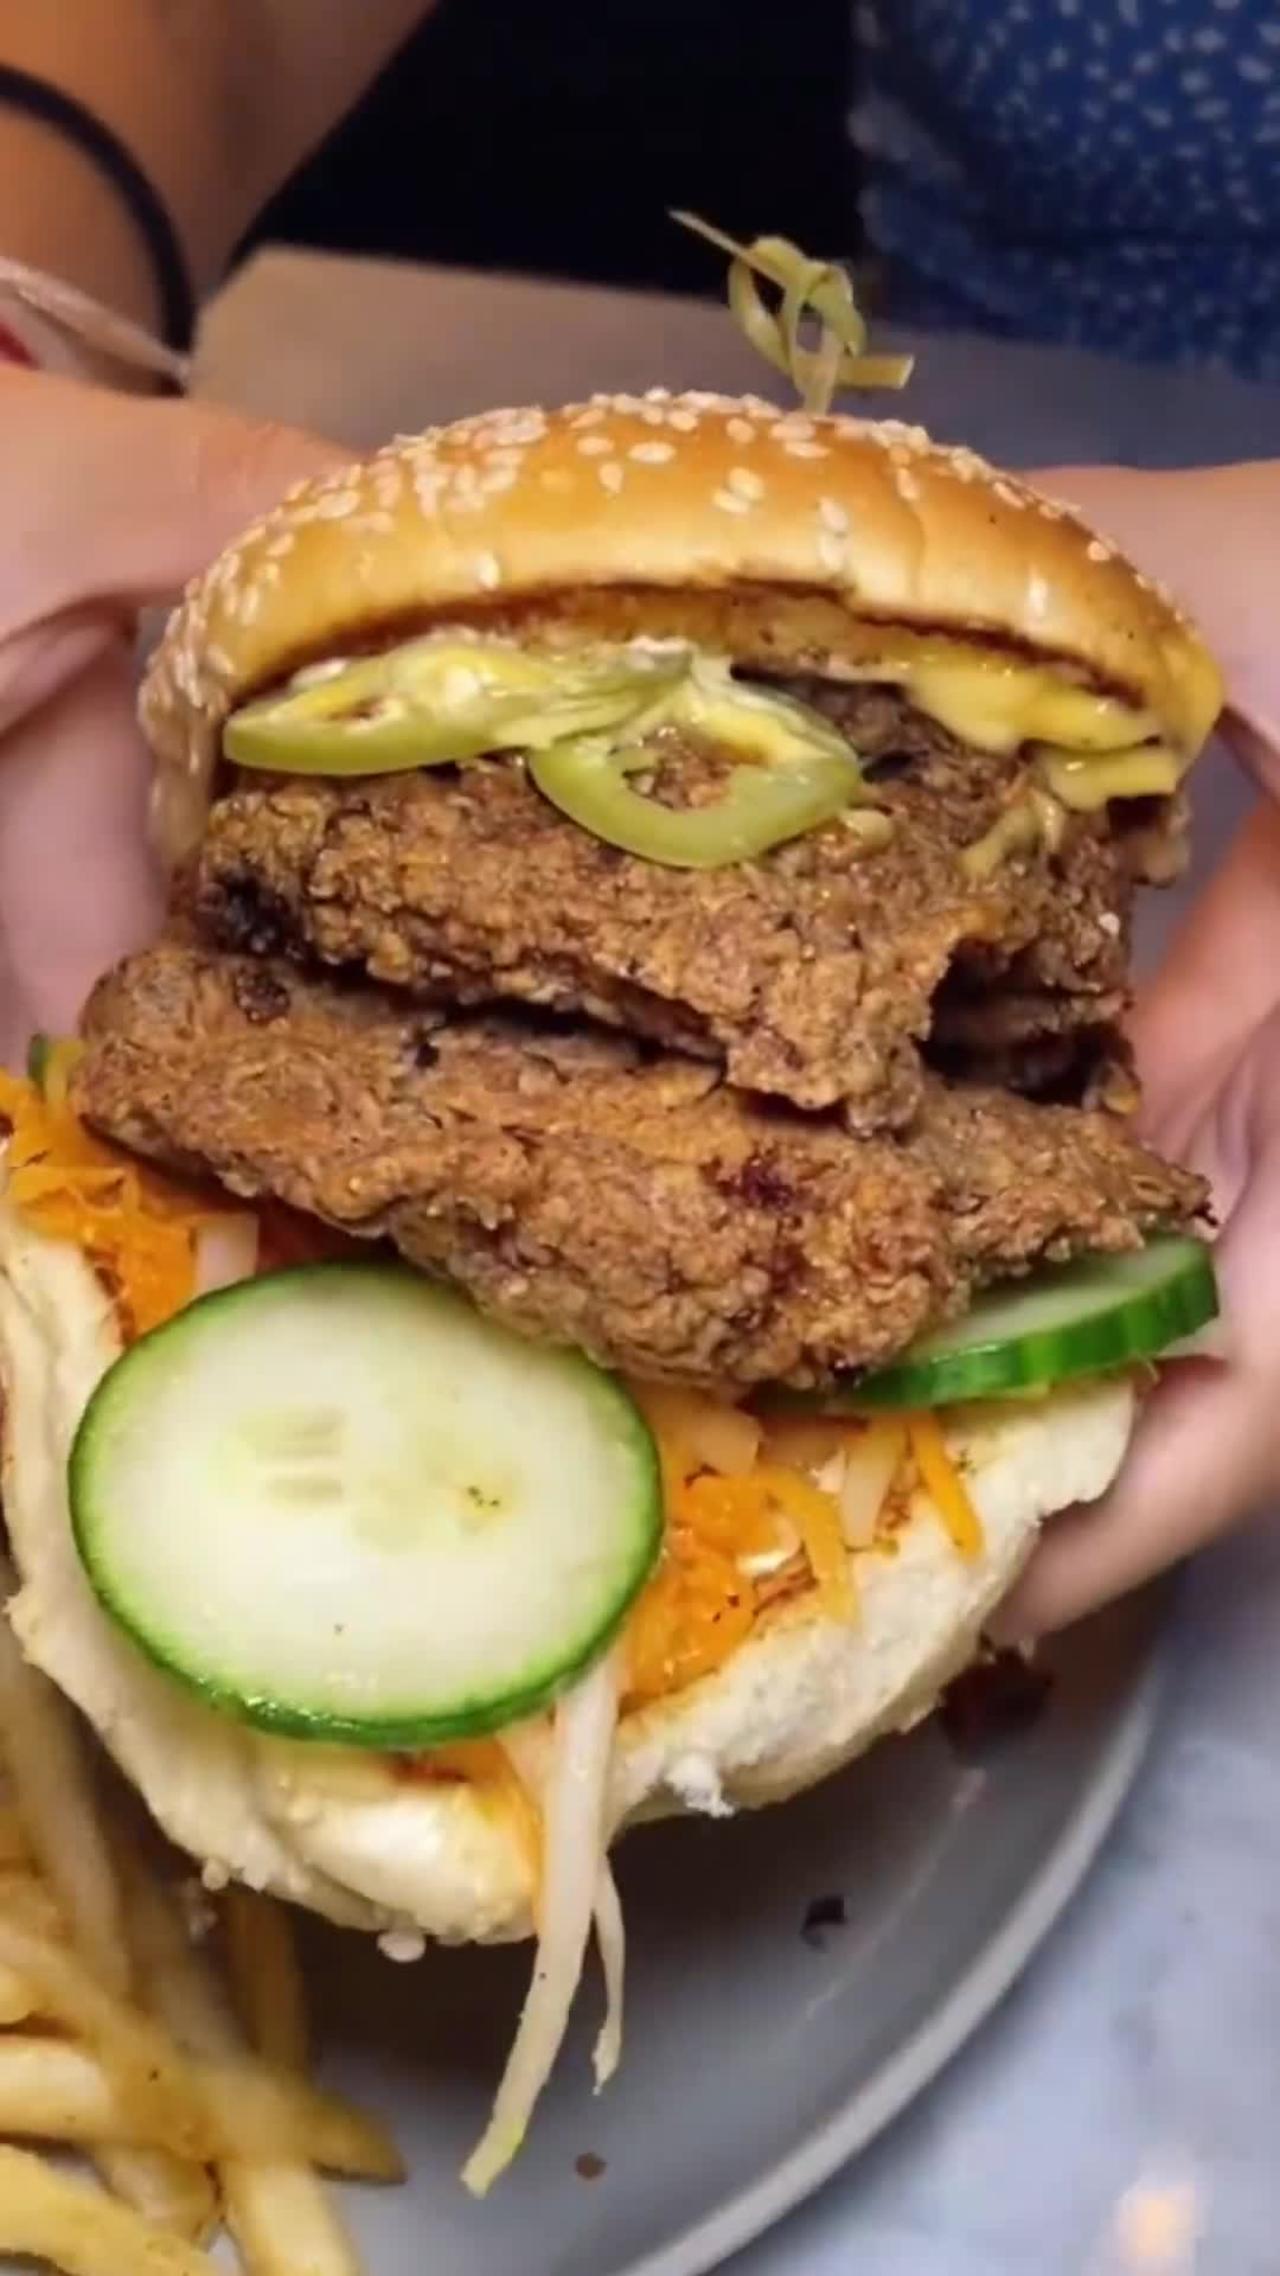 Which do you prefer, a cheeseburger or a fried chicken sandwich